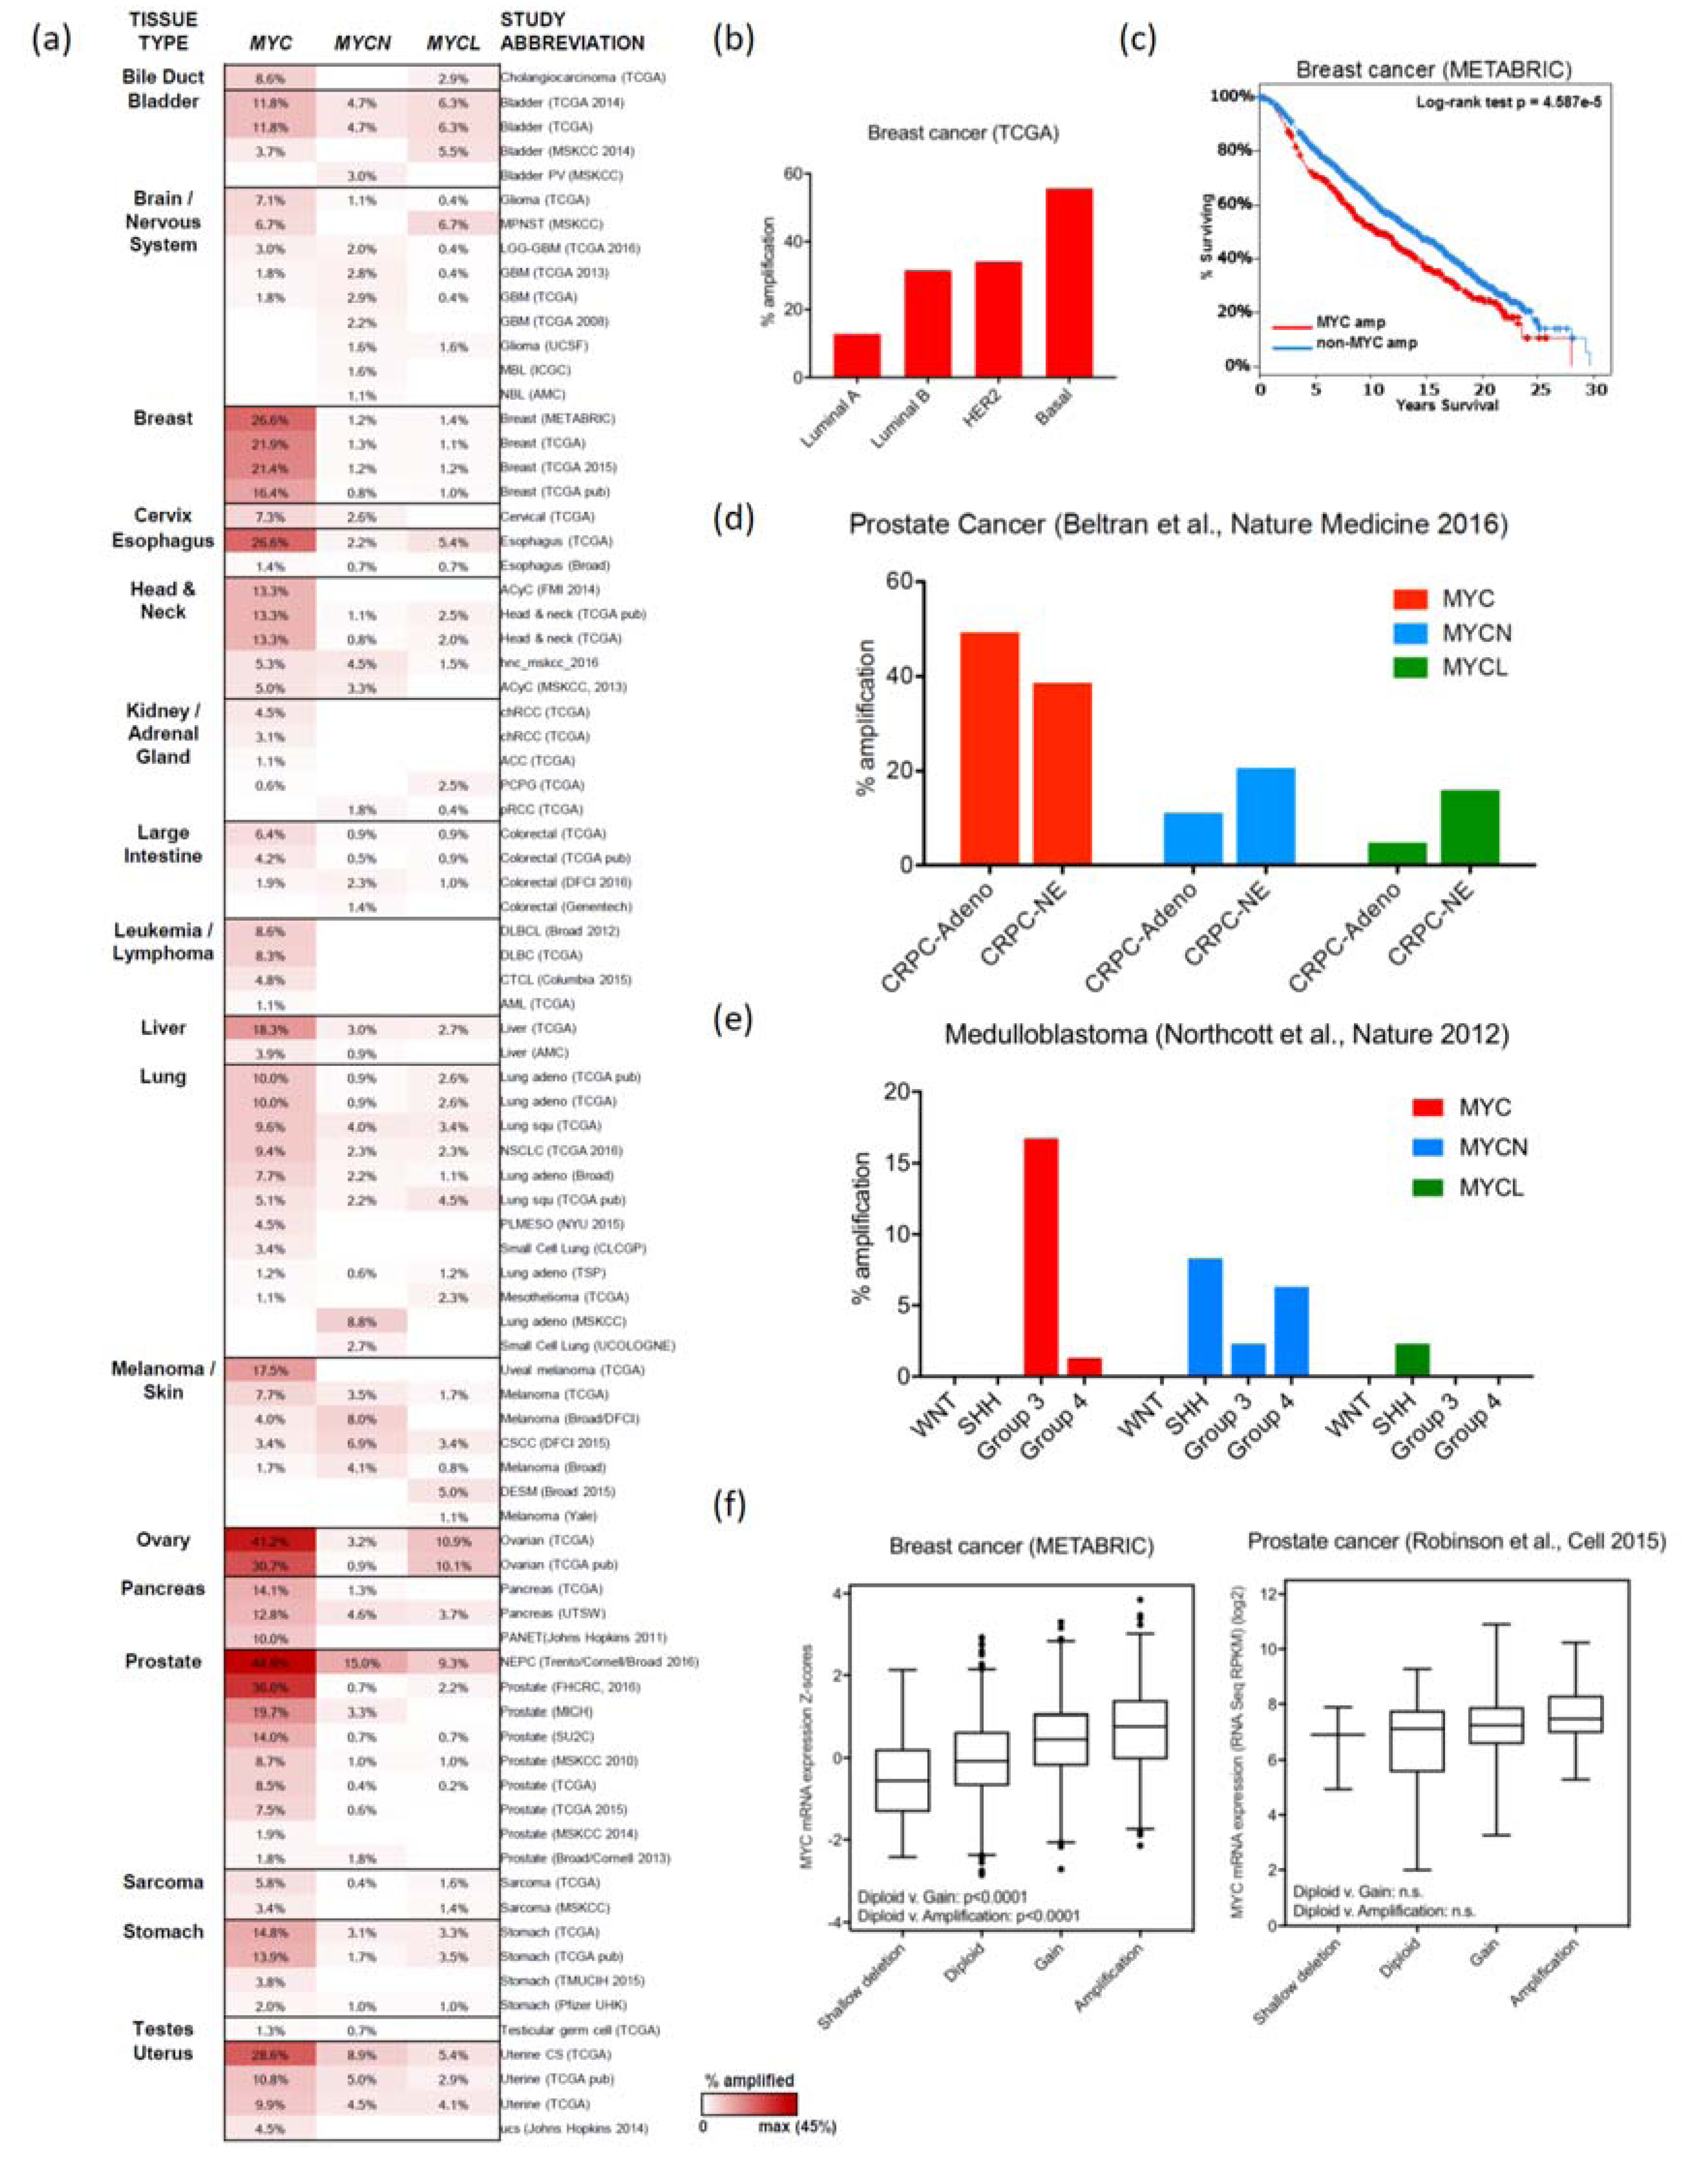 Genes | Free Full-Text | MYC Deregulation in Primary Human Cancers | HTML